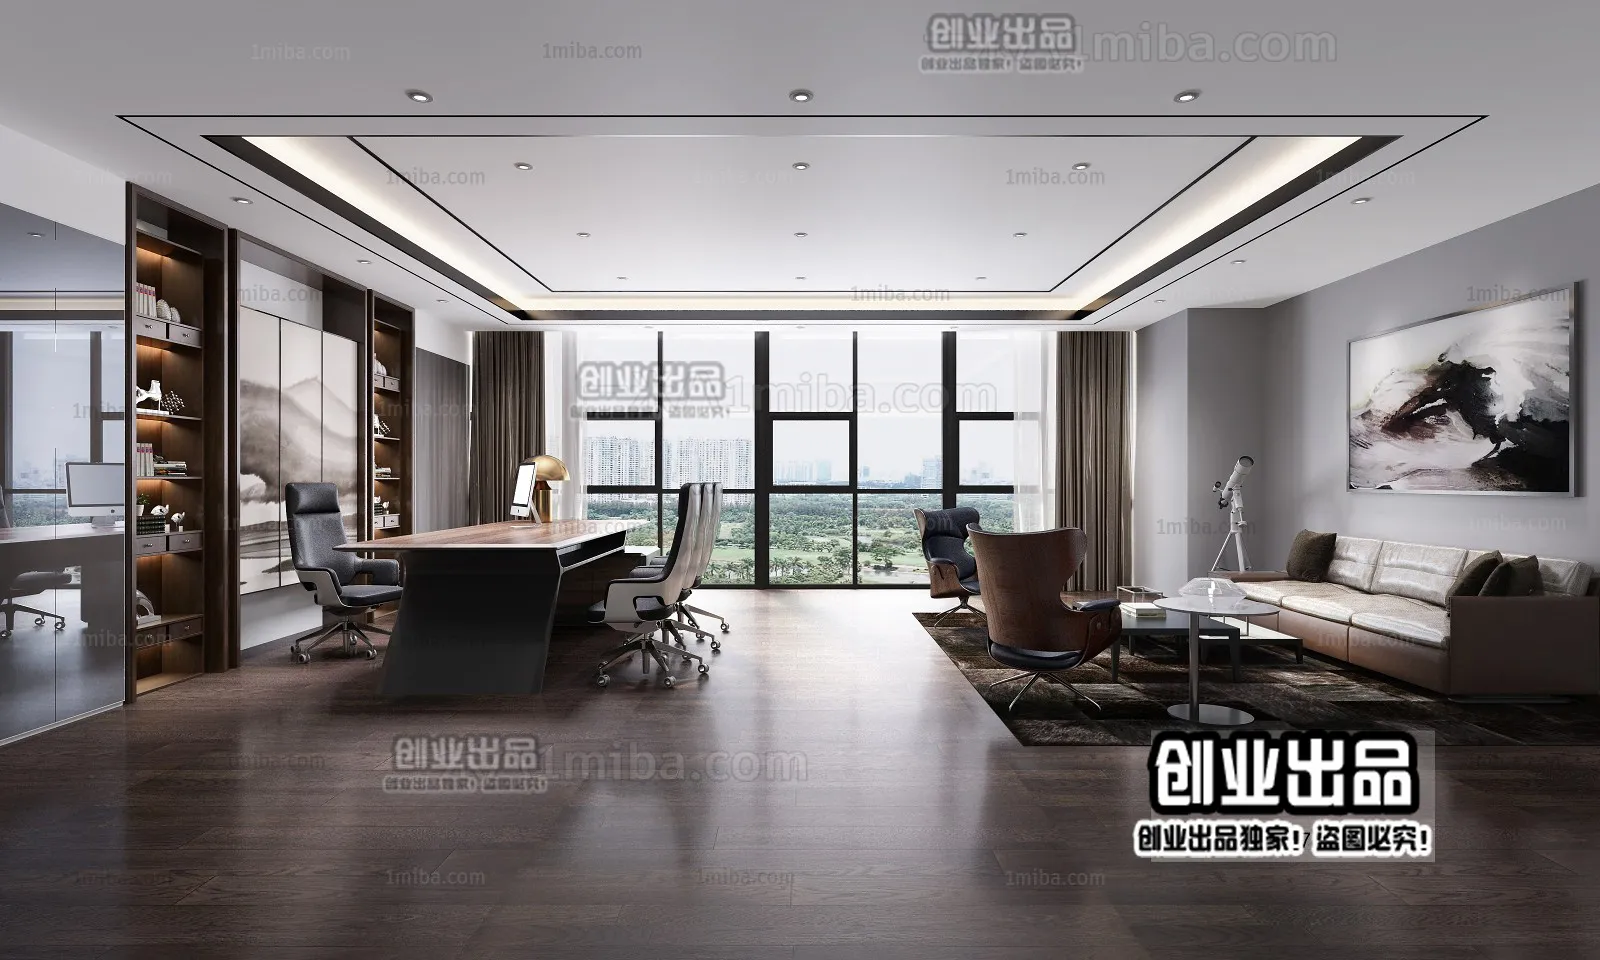 3D OFFICE INTERIOR (VRAY) – MANAGER ROOM 3D SCENES – 181